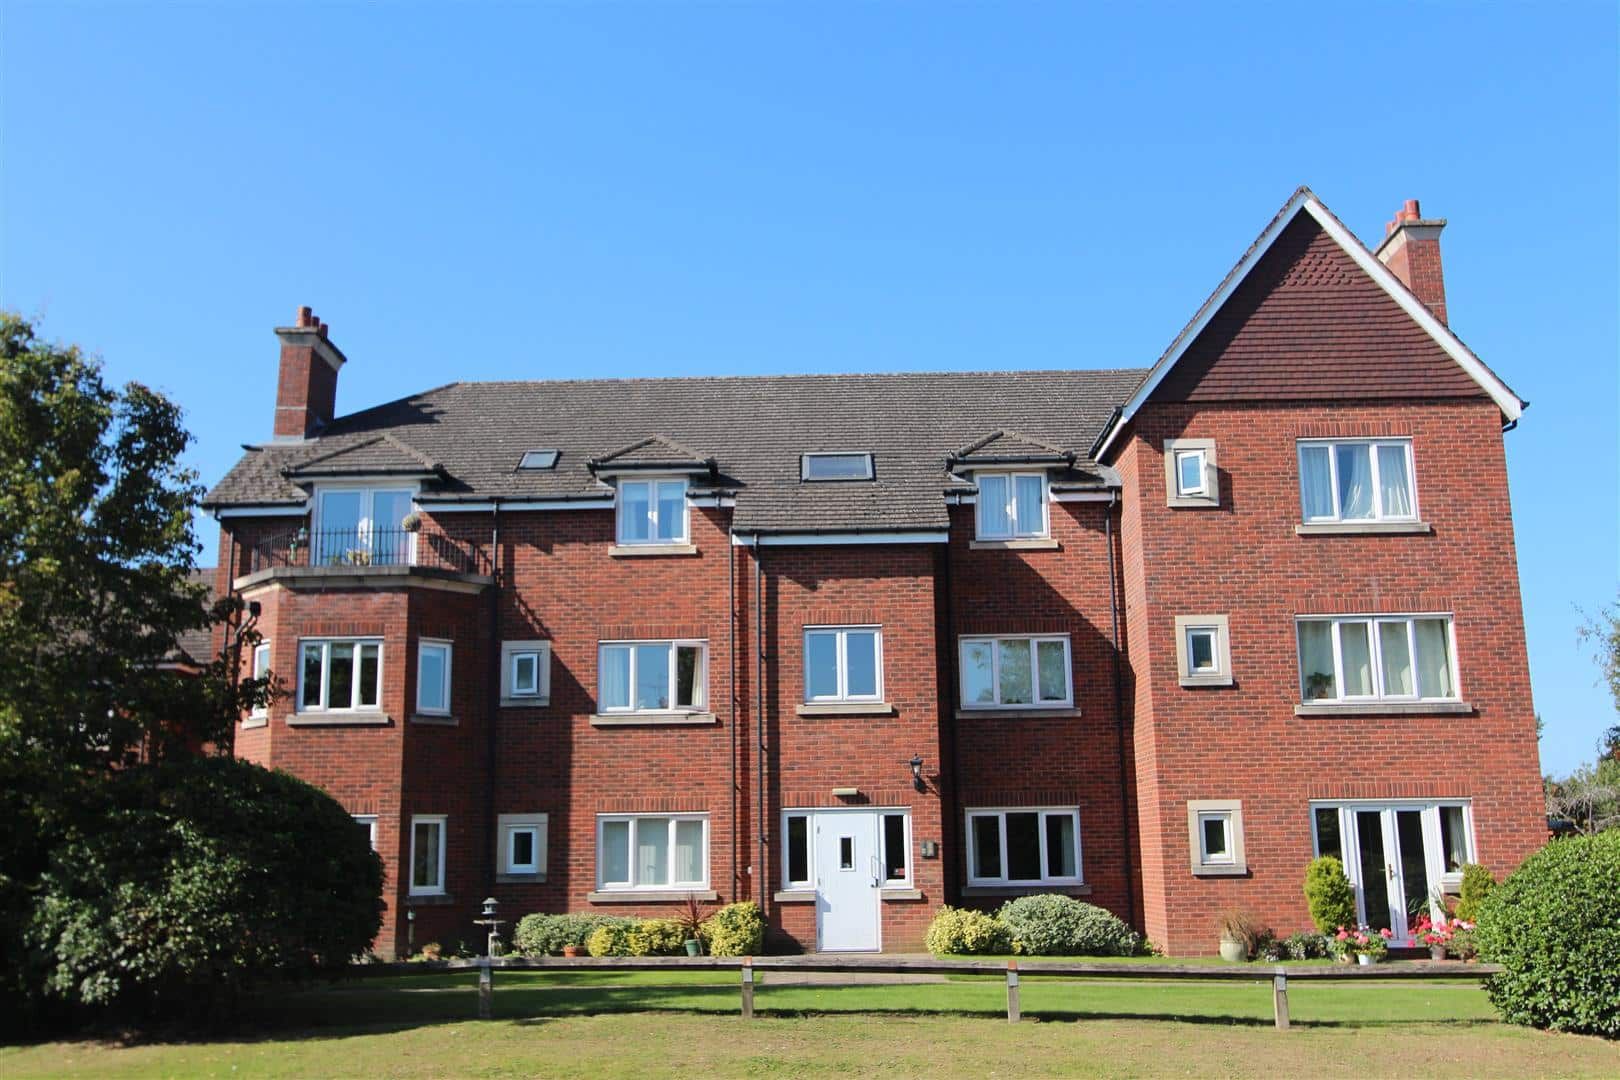 Apartment 12, Ash Court, Coventry, 668 Kenilworth Road, CV7 7JF